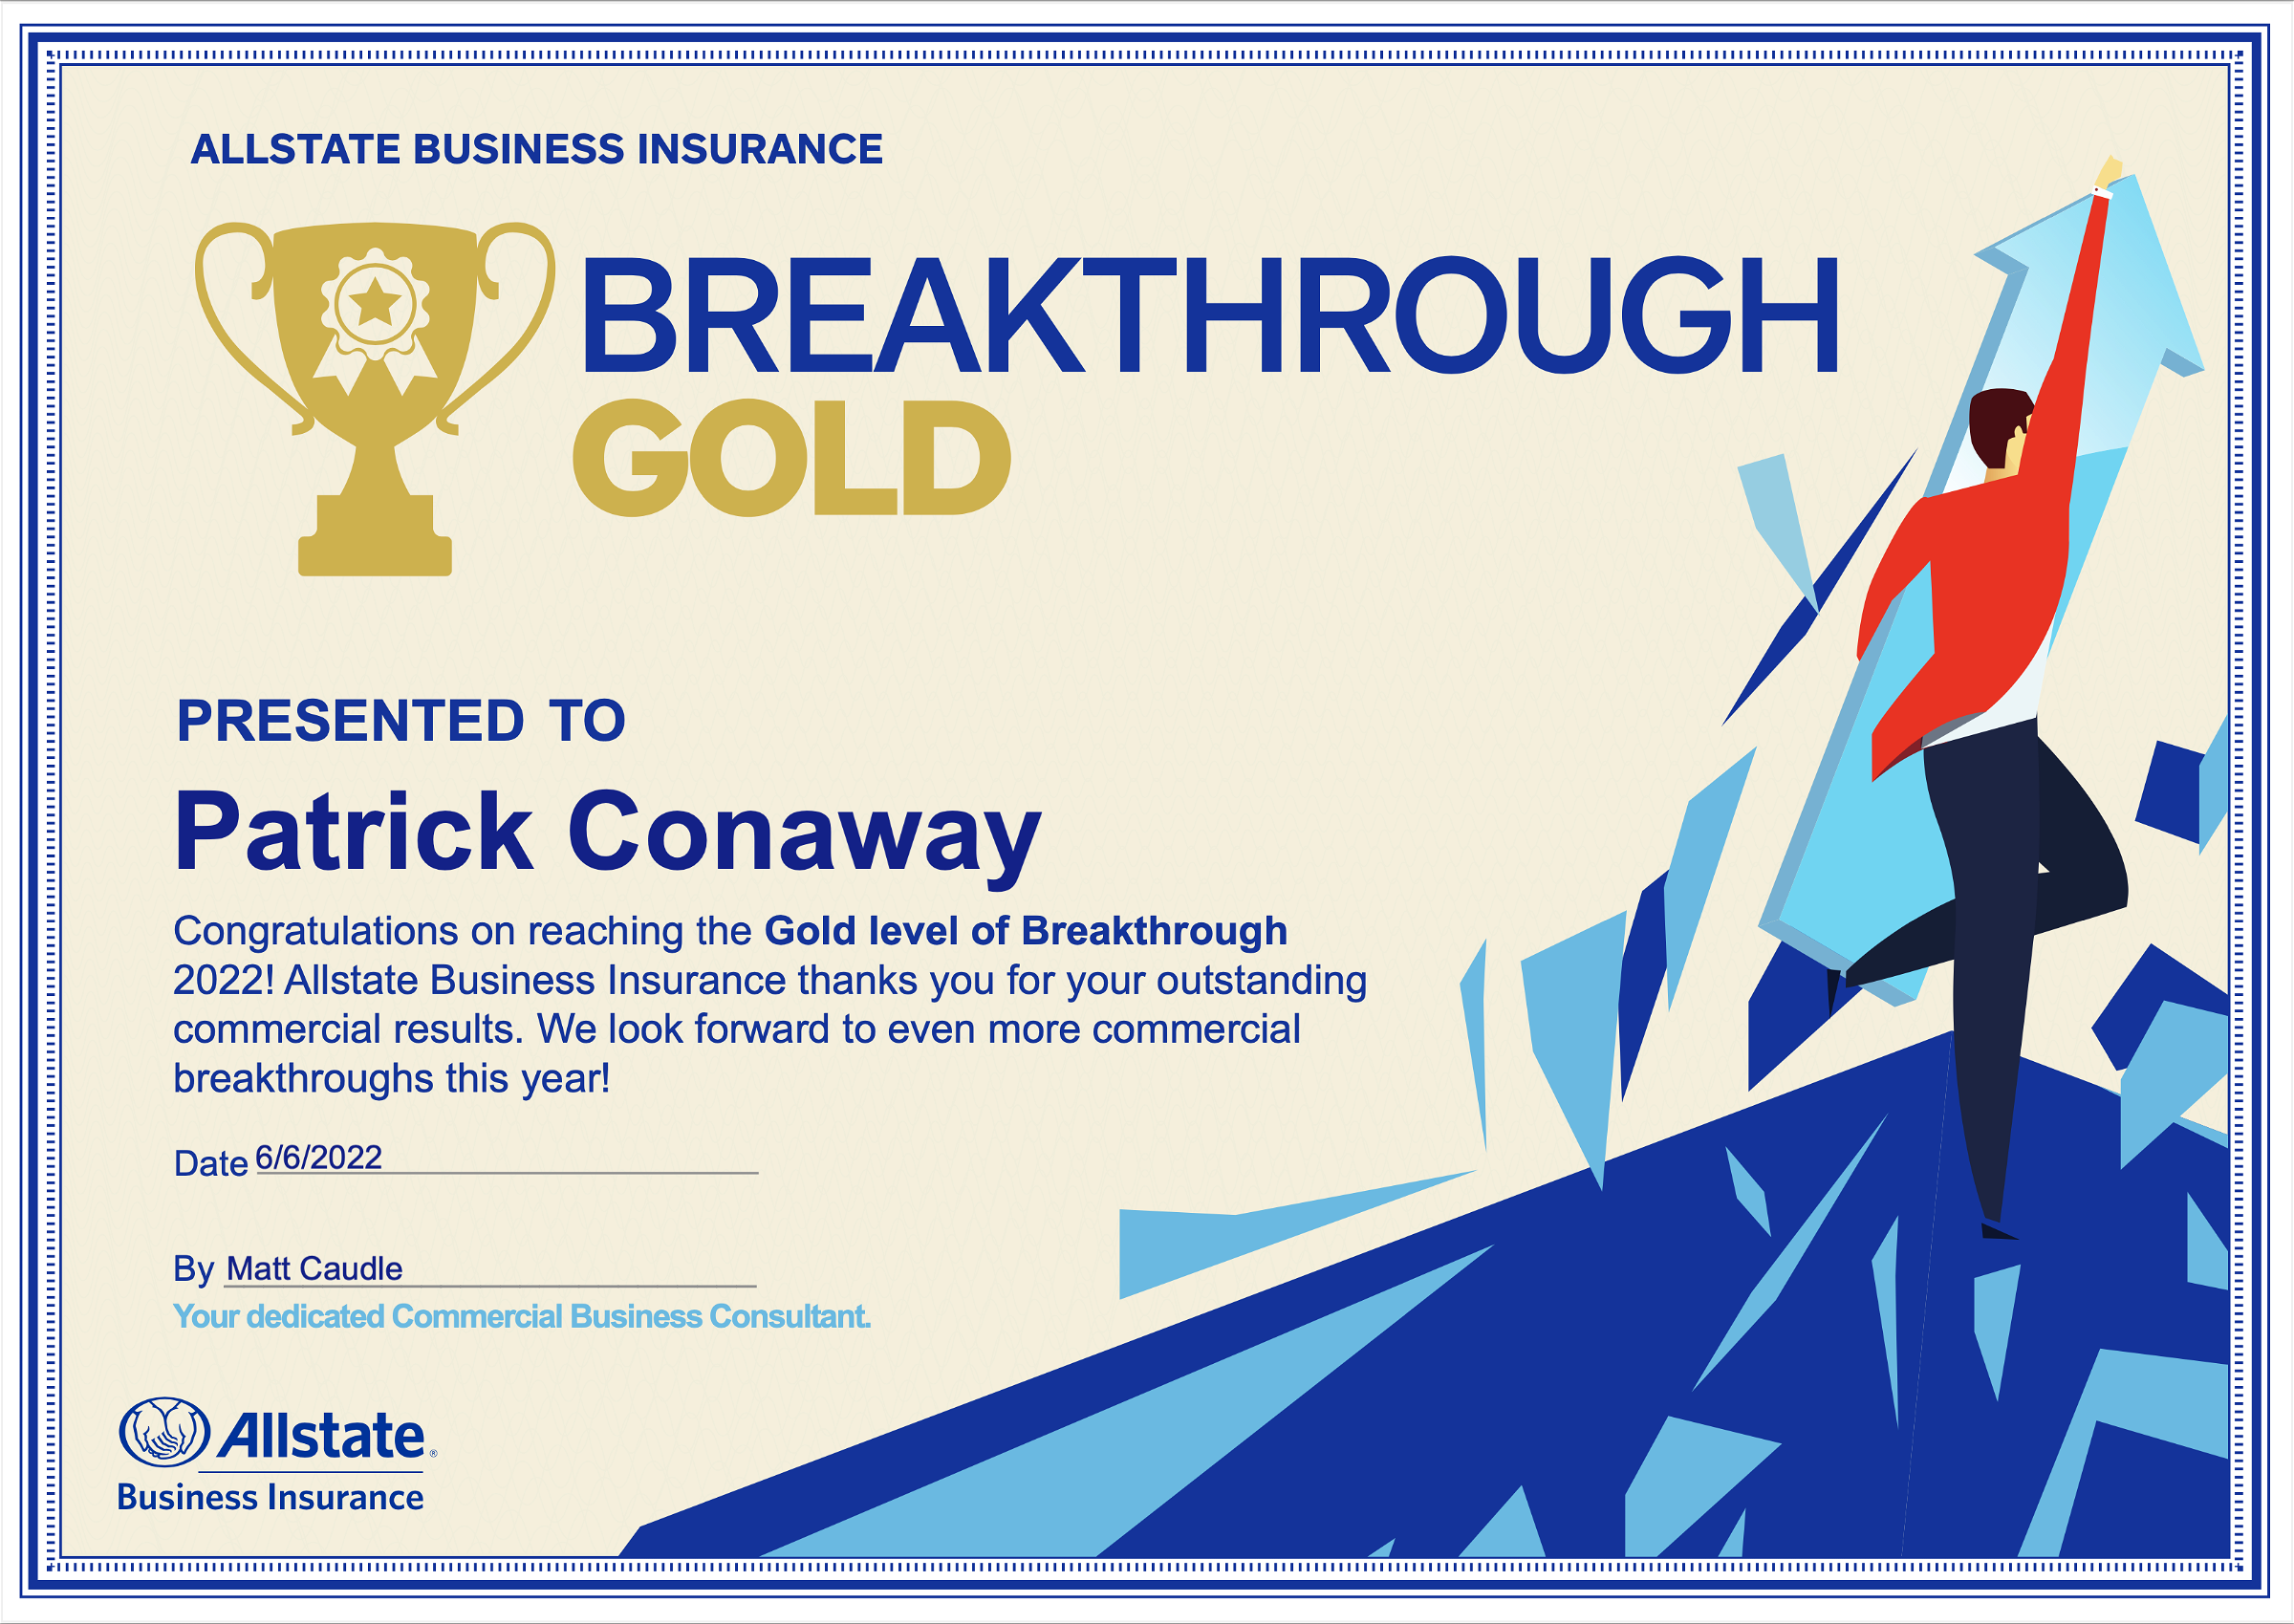 Allstate Business Insurance Awards Patrick Conaway the Gold level of Breakthrough